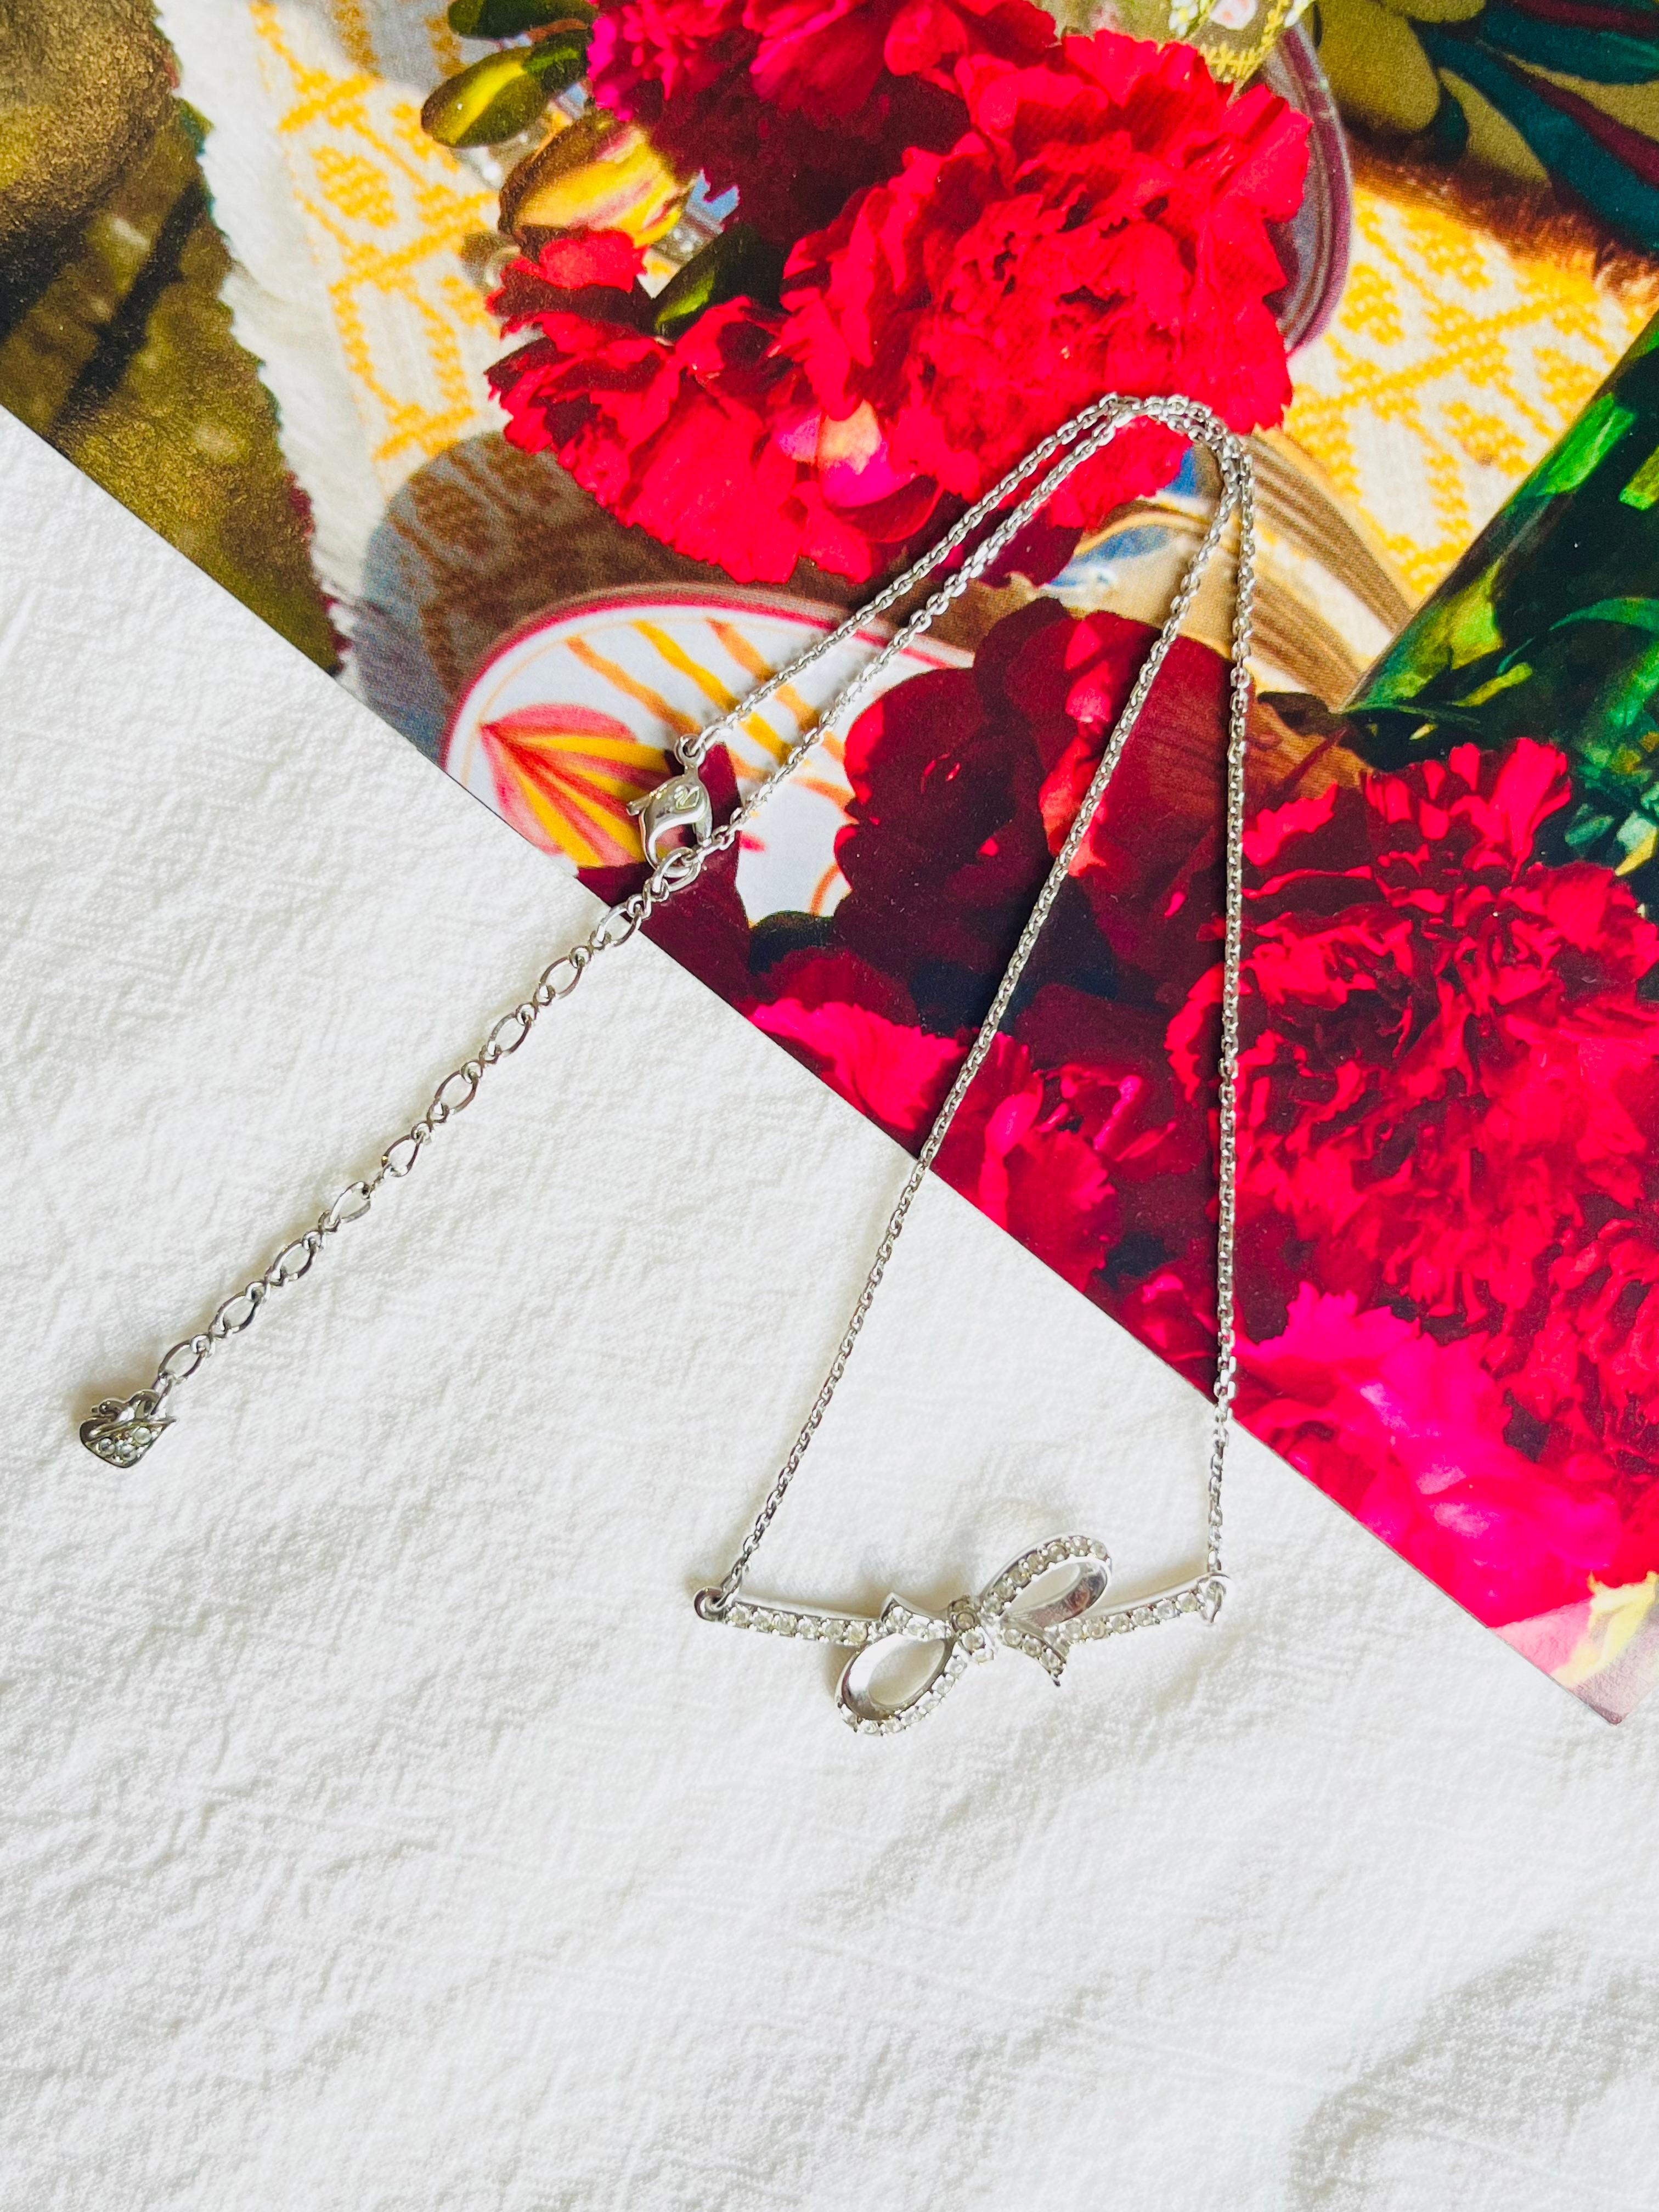 Very excellent condition and new. With box. 100% Genuine. 

The Bow collection uses the bow motif as a flirtatious and fun symbol of love. Sophisticated and modern, yet playful and youthful, this rhodium-plated necklace exudes timeless romance with